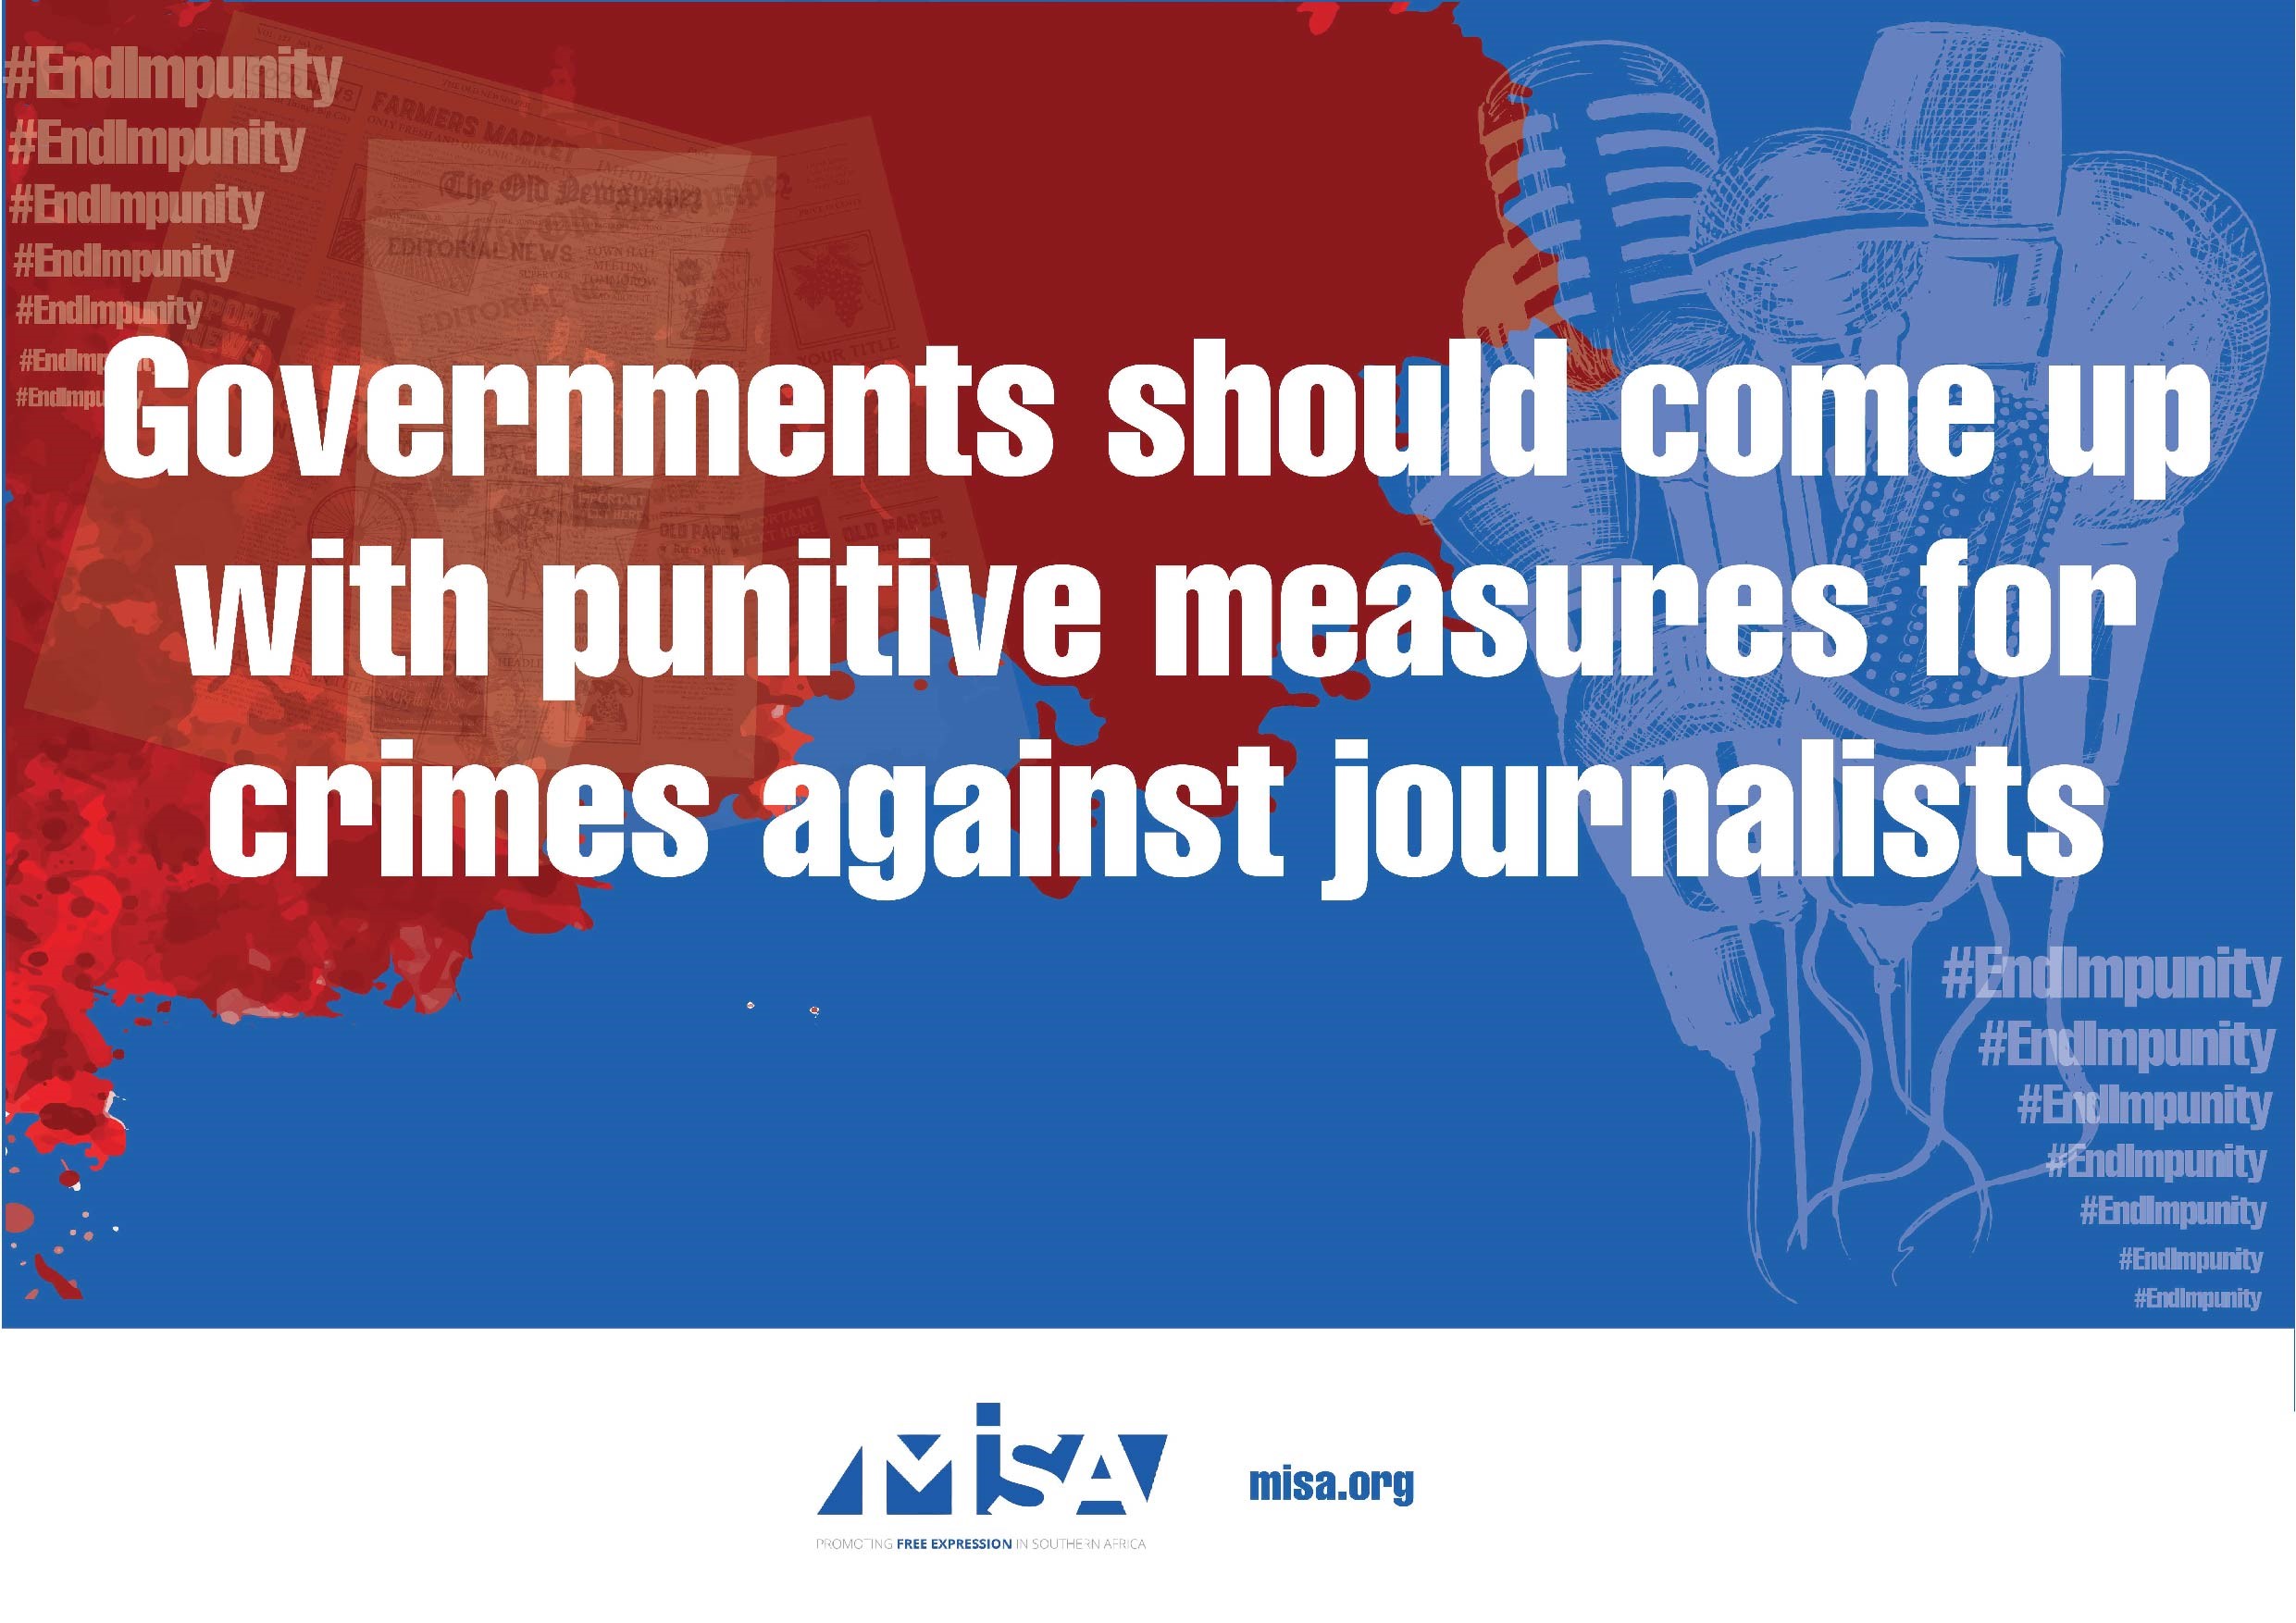 Governments should come up with punitive measures for crimes against journalists